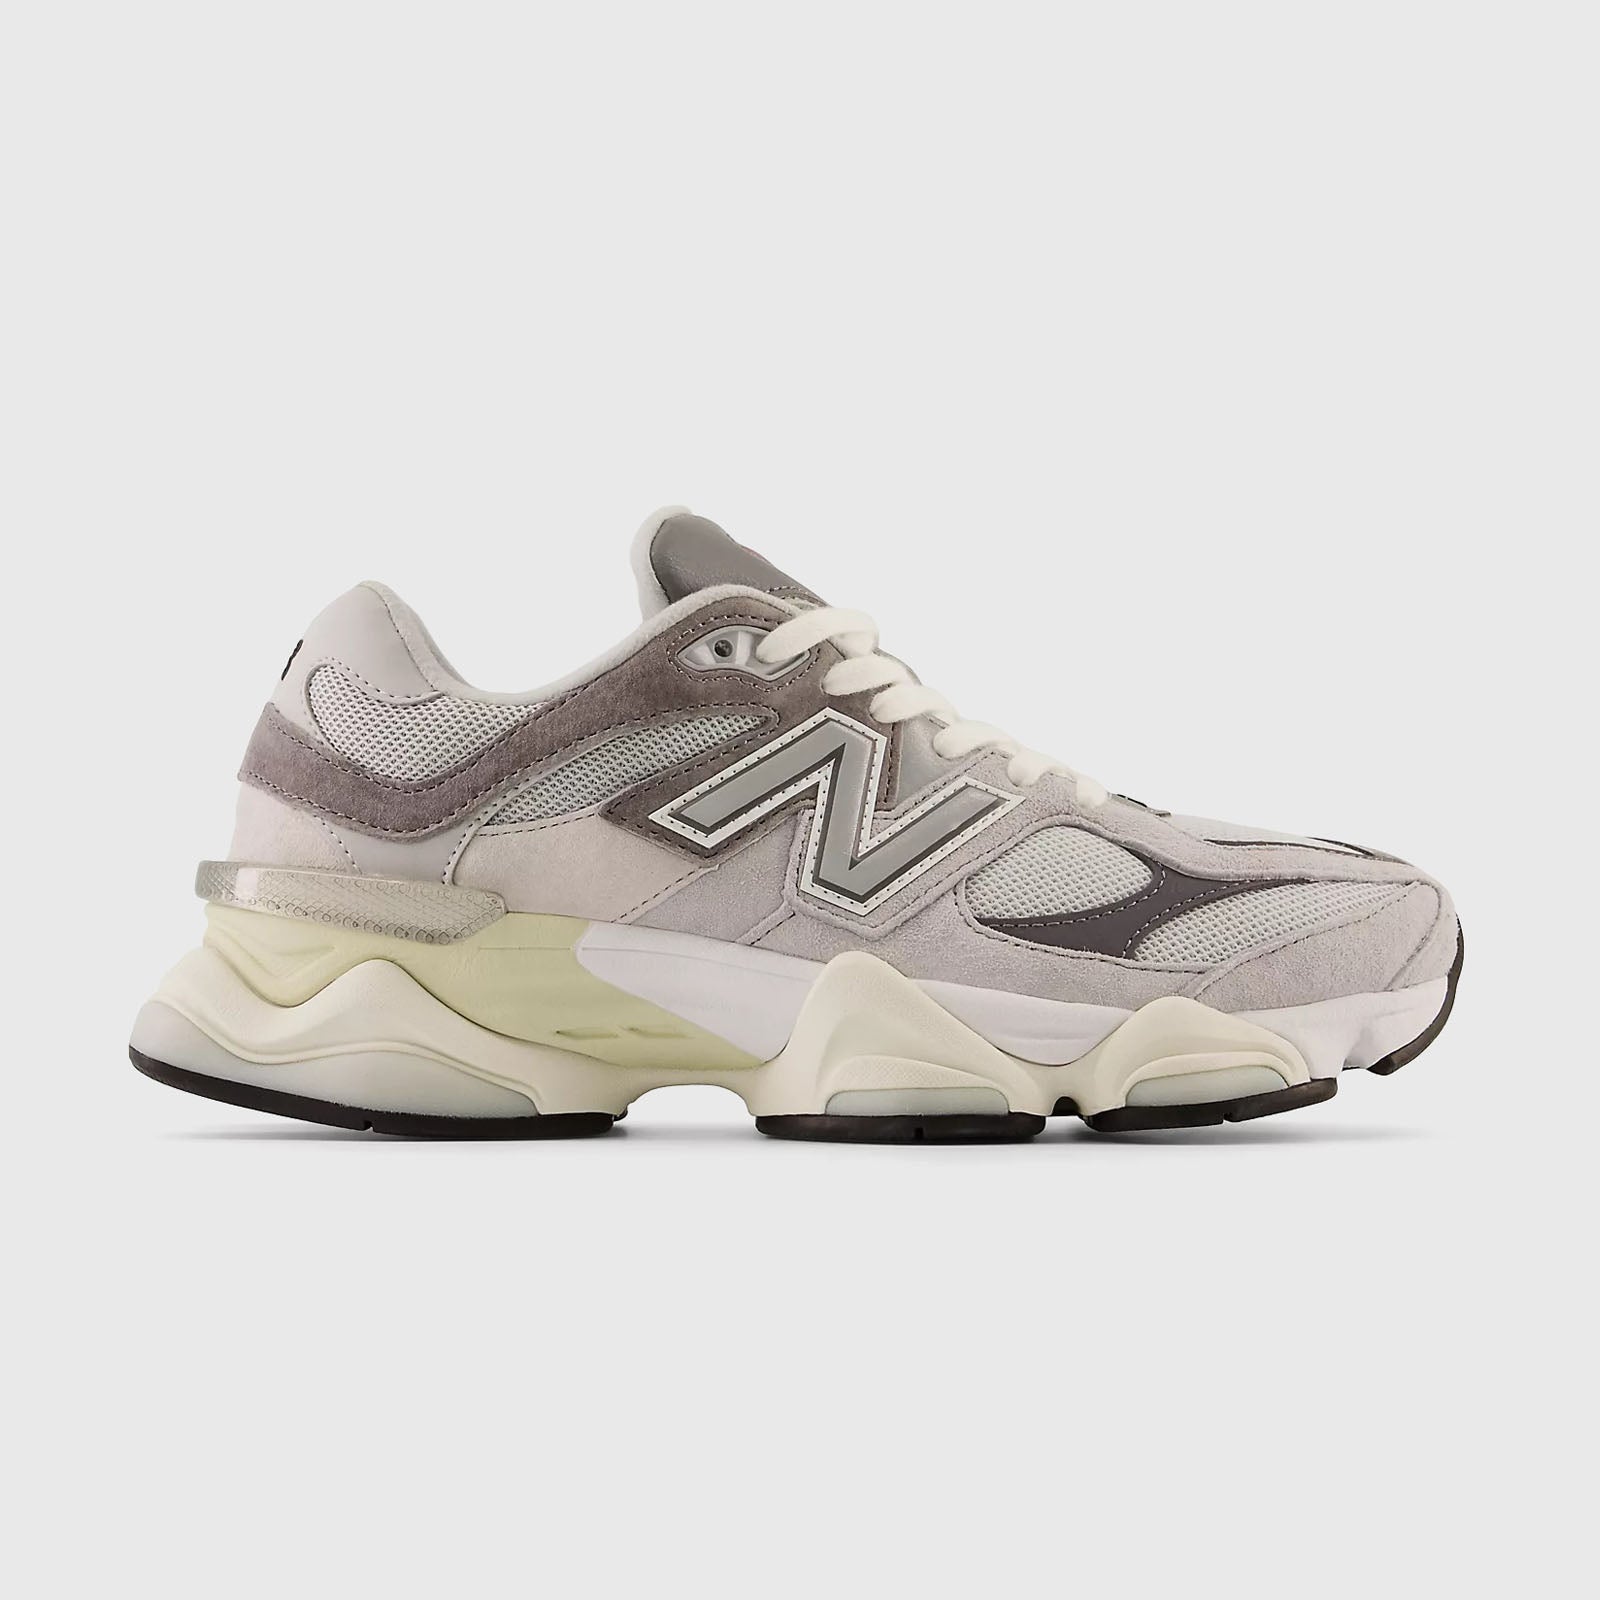 H1 Title: New Balance 9060 Synthetic Grey Sneaker - 7